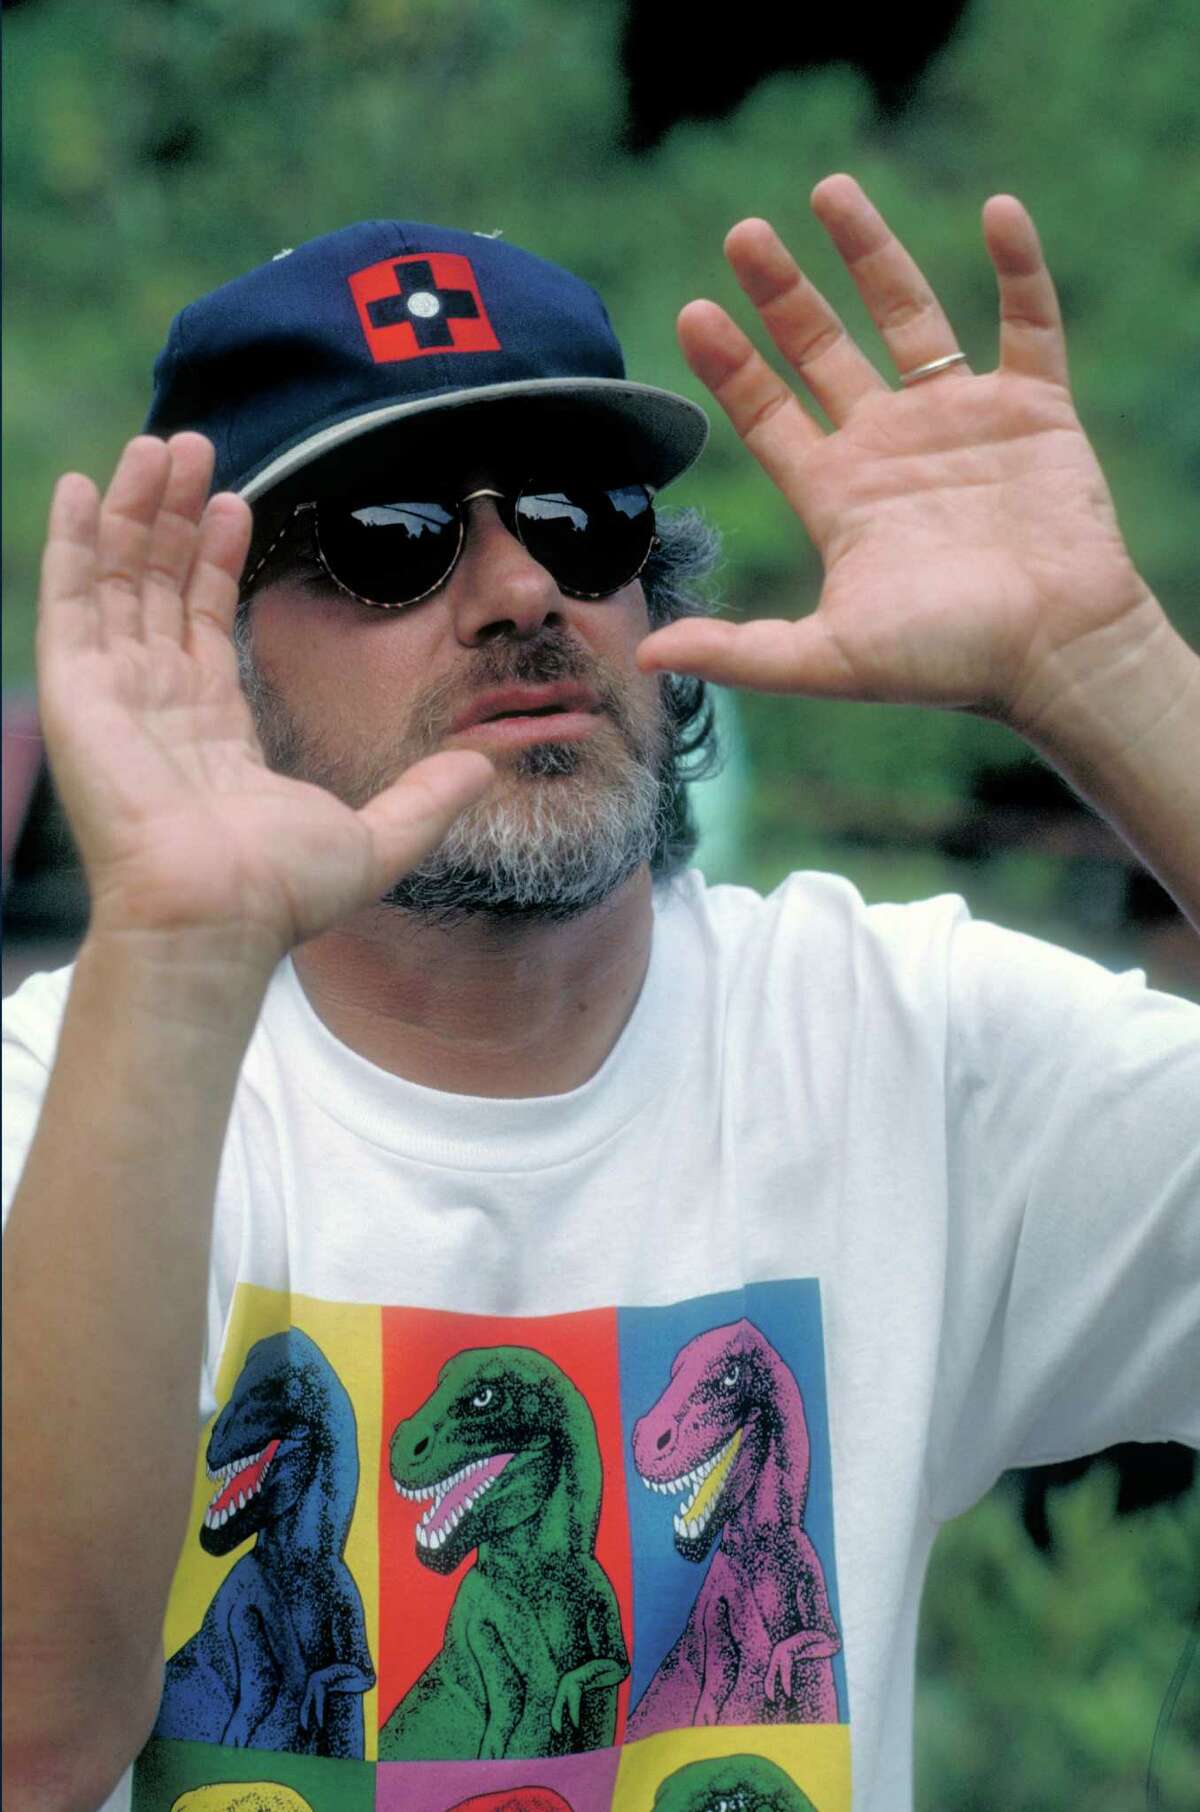 Director Steven Spielberg turned the book into a film. Here, he wears a Warhol-inspired dinosaur t-shirt while directing the movie.